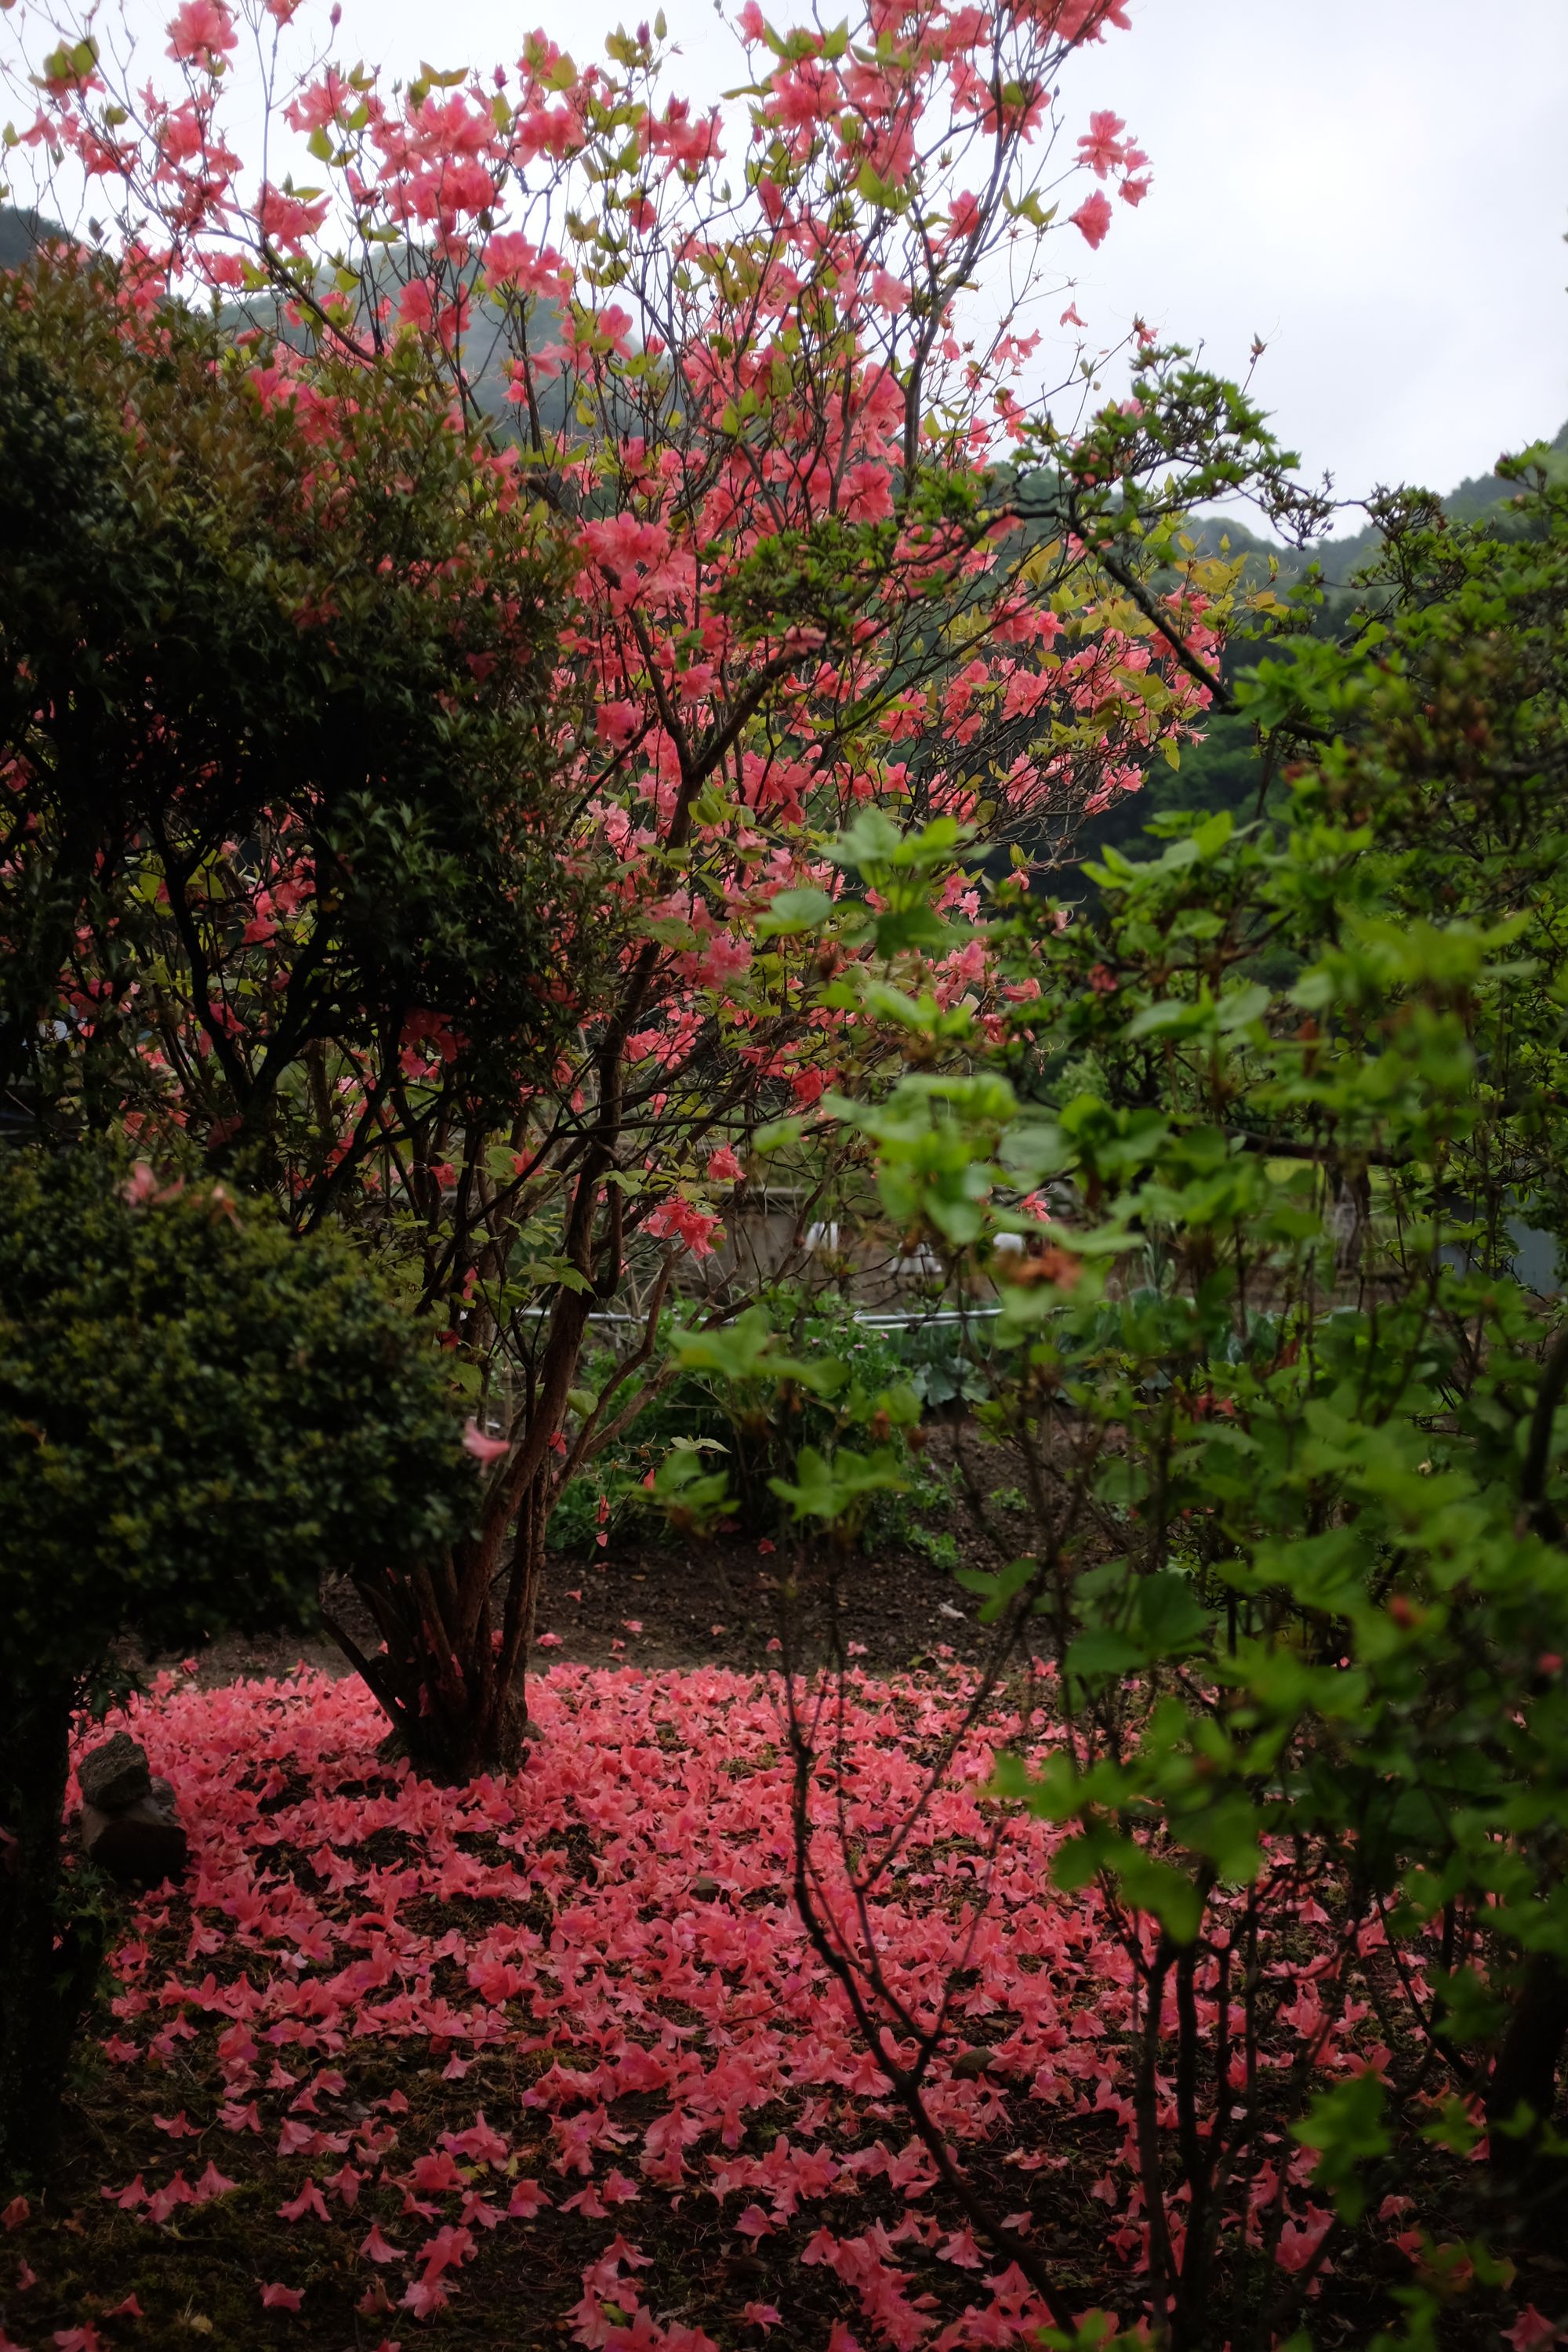 The ground is carpeted with bright pink flowers under an azalea tree in a back yard.